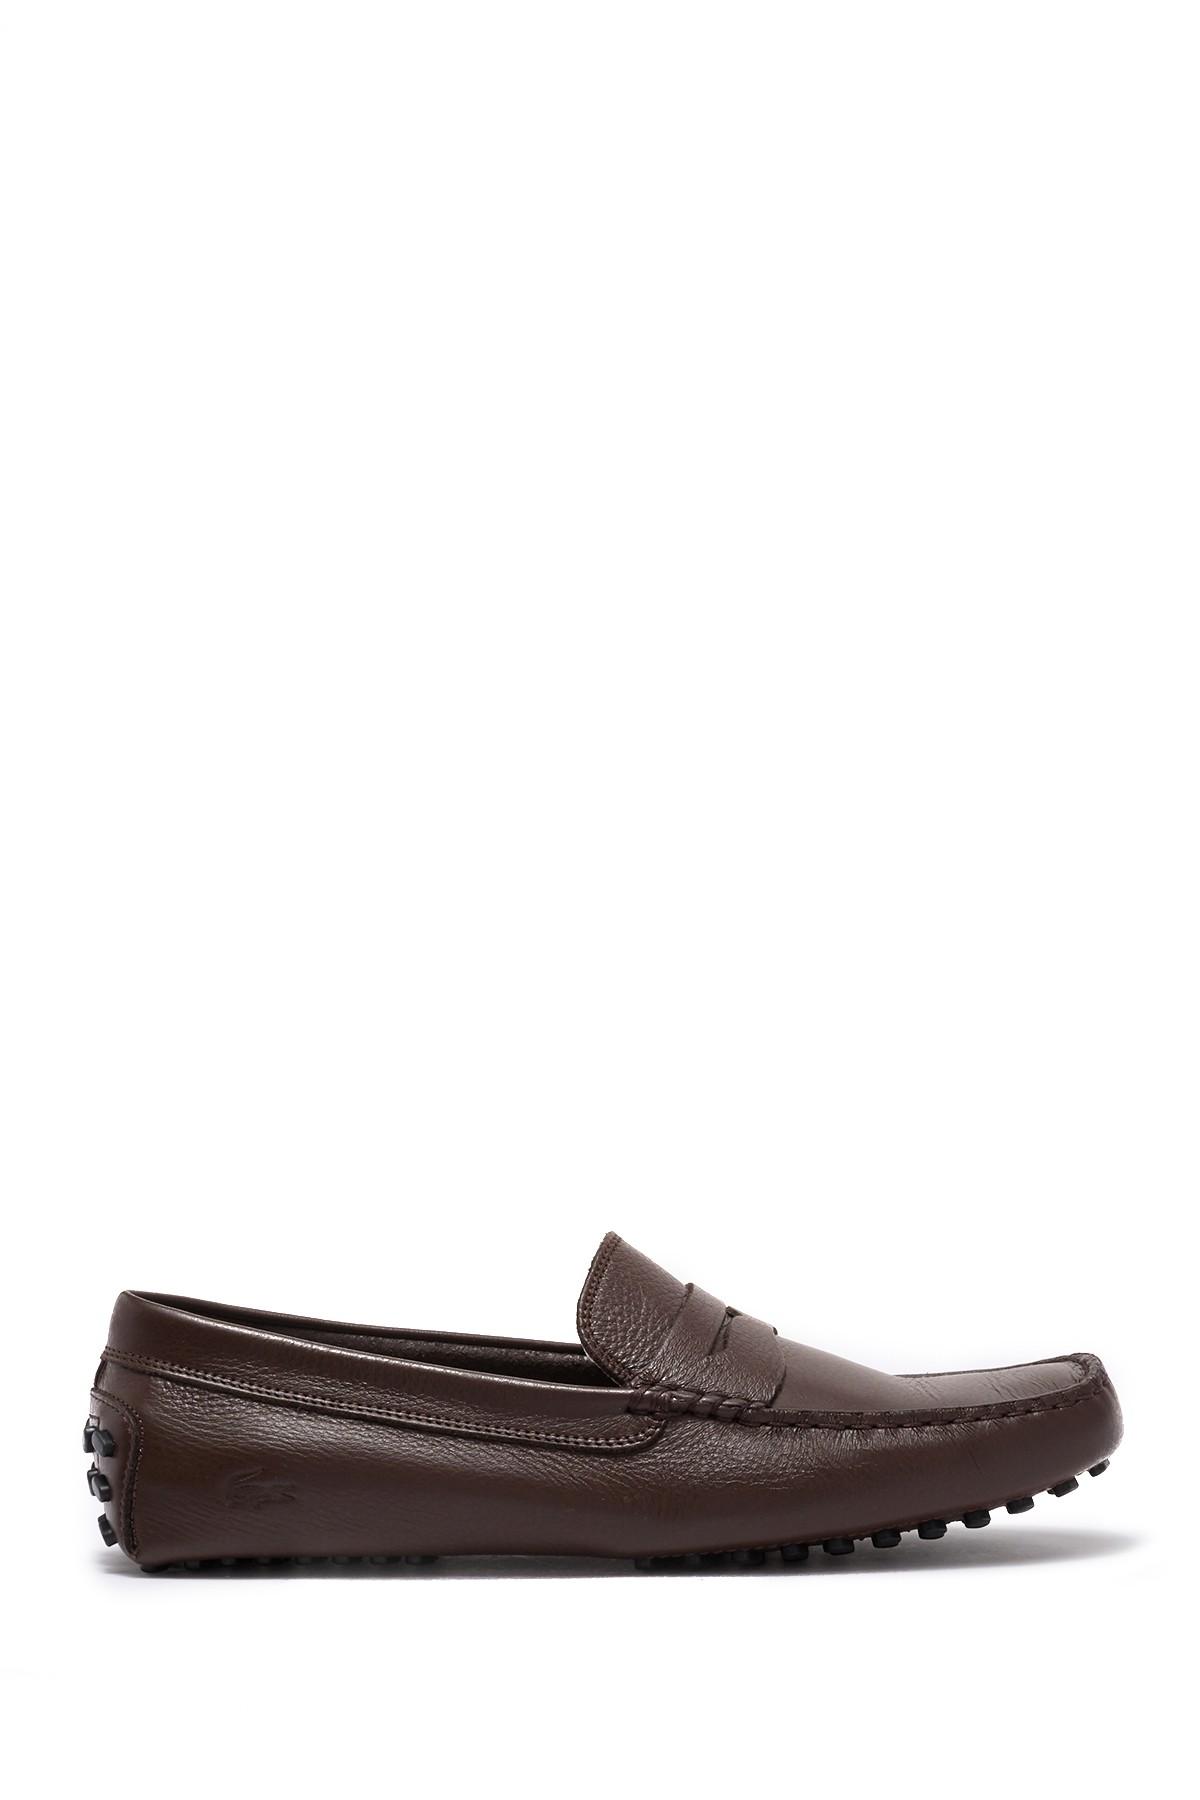 lacoste concours 118 leather penny loafer